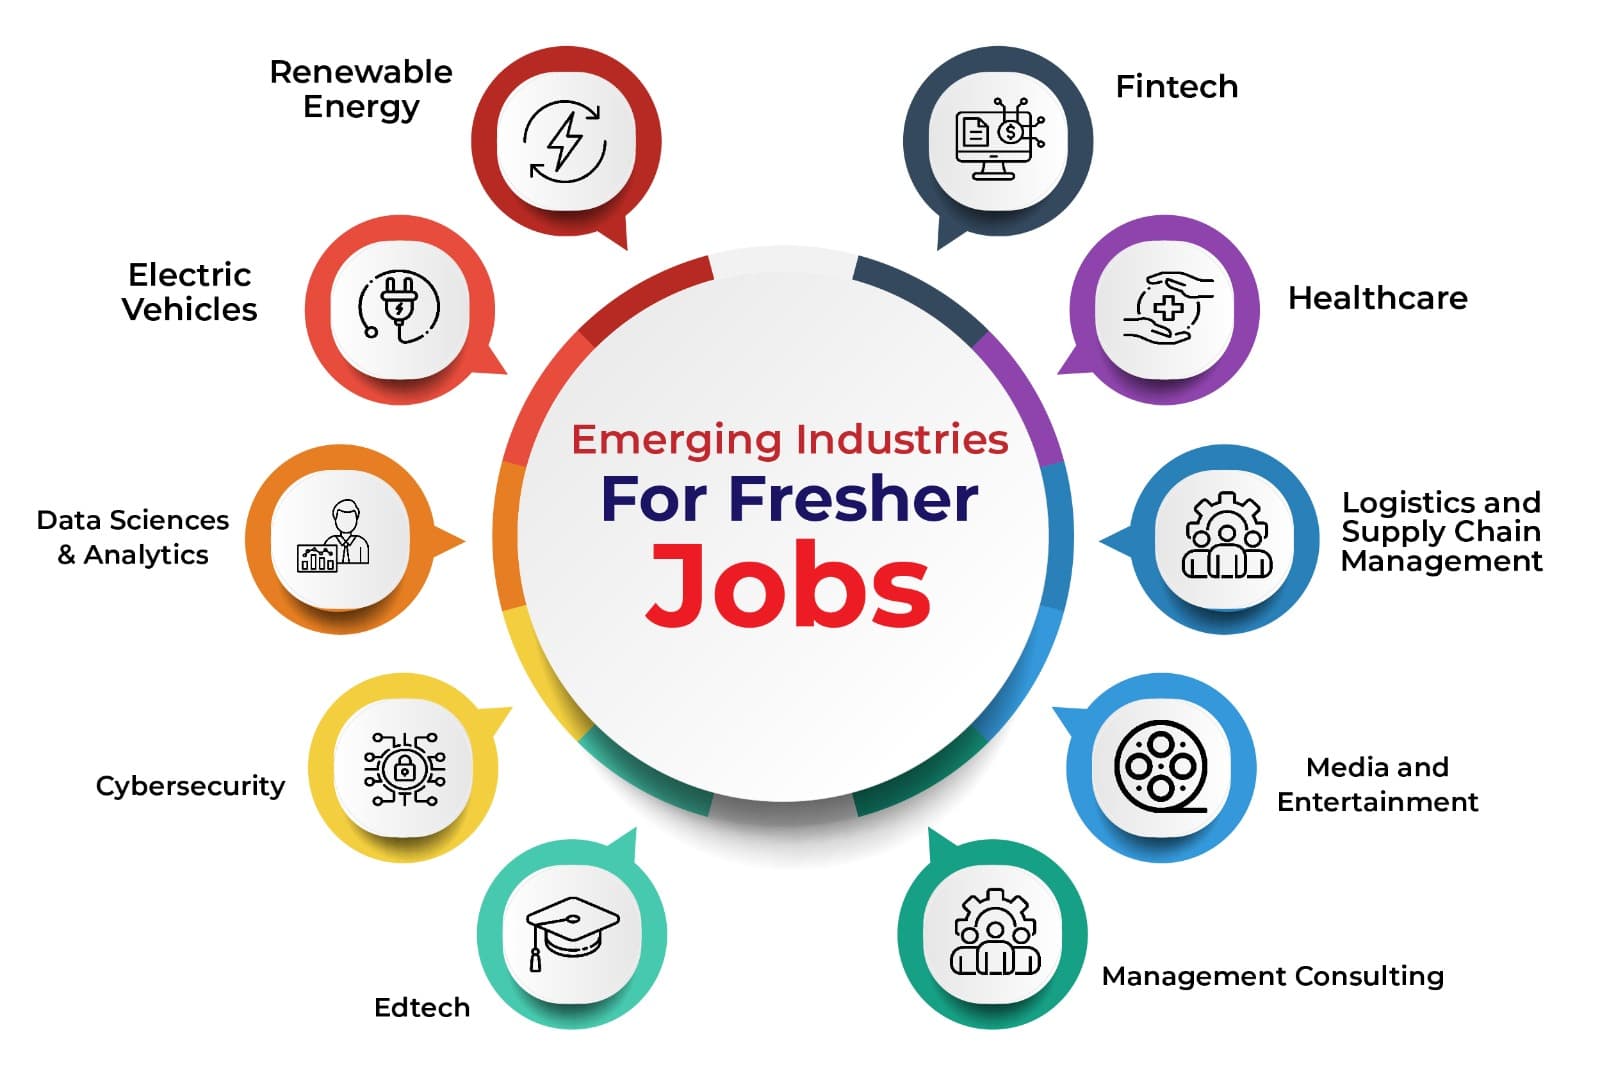 Emerging Industries For Fresher Jobs